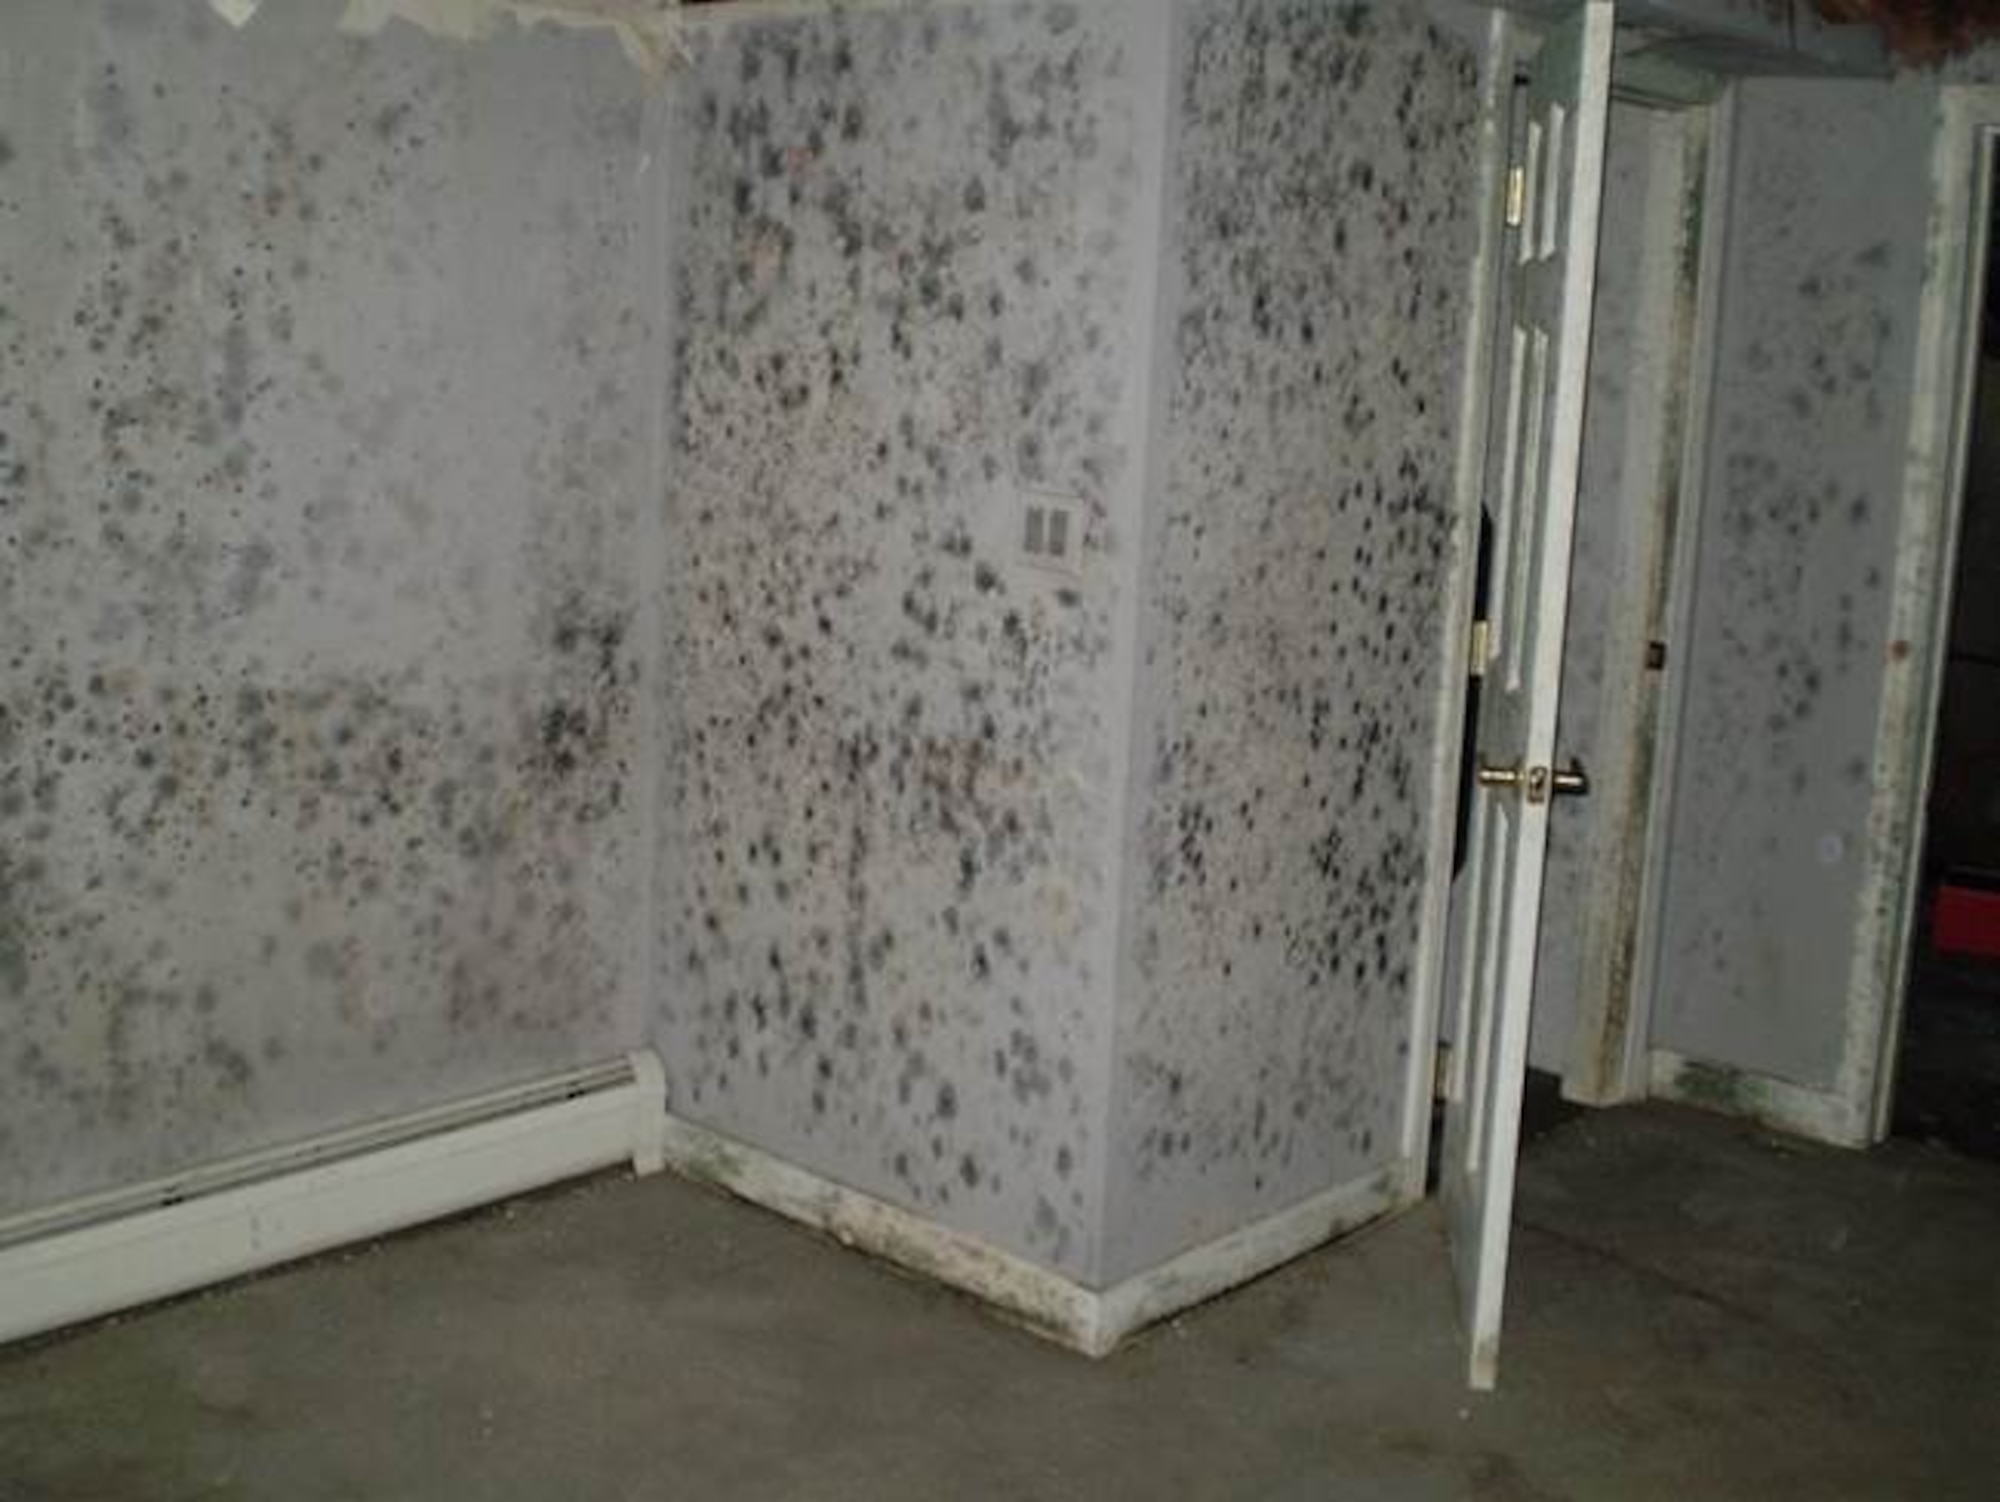 A home left unattended without proper air circulation and excess moisture produce mold at Joint Base Elmendorf-Richardson, Alaska, Nov. 17, 2017. To raise awareness about mold, Aurora Military Housing provides opportunities and resources for inspection, evaluation, and education for tenants.